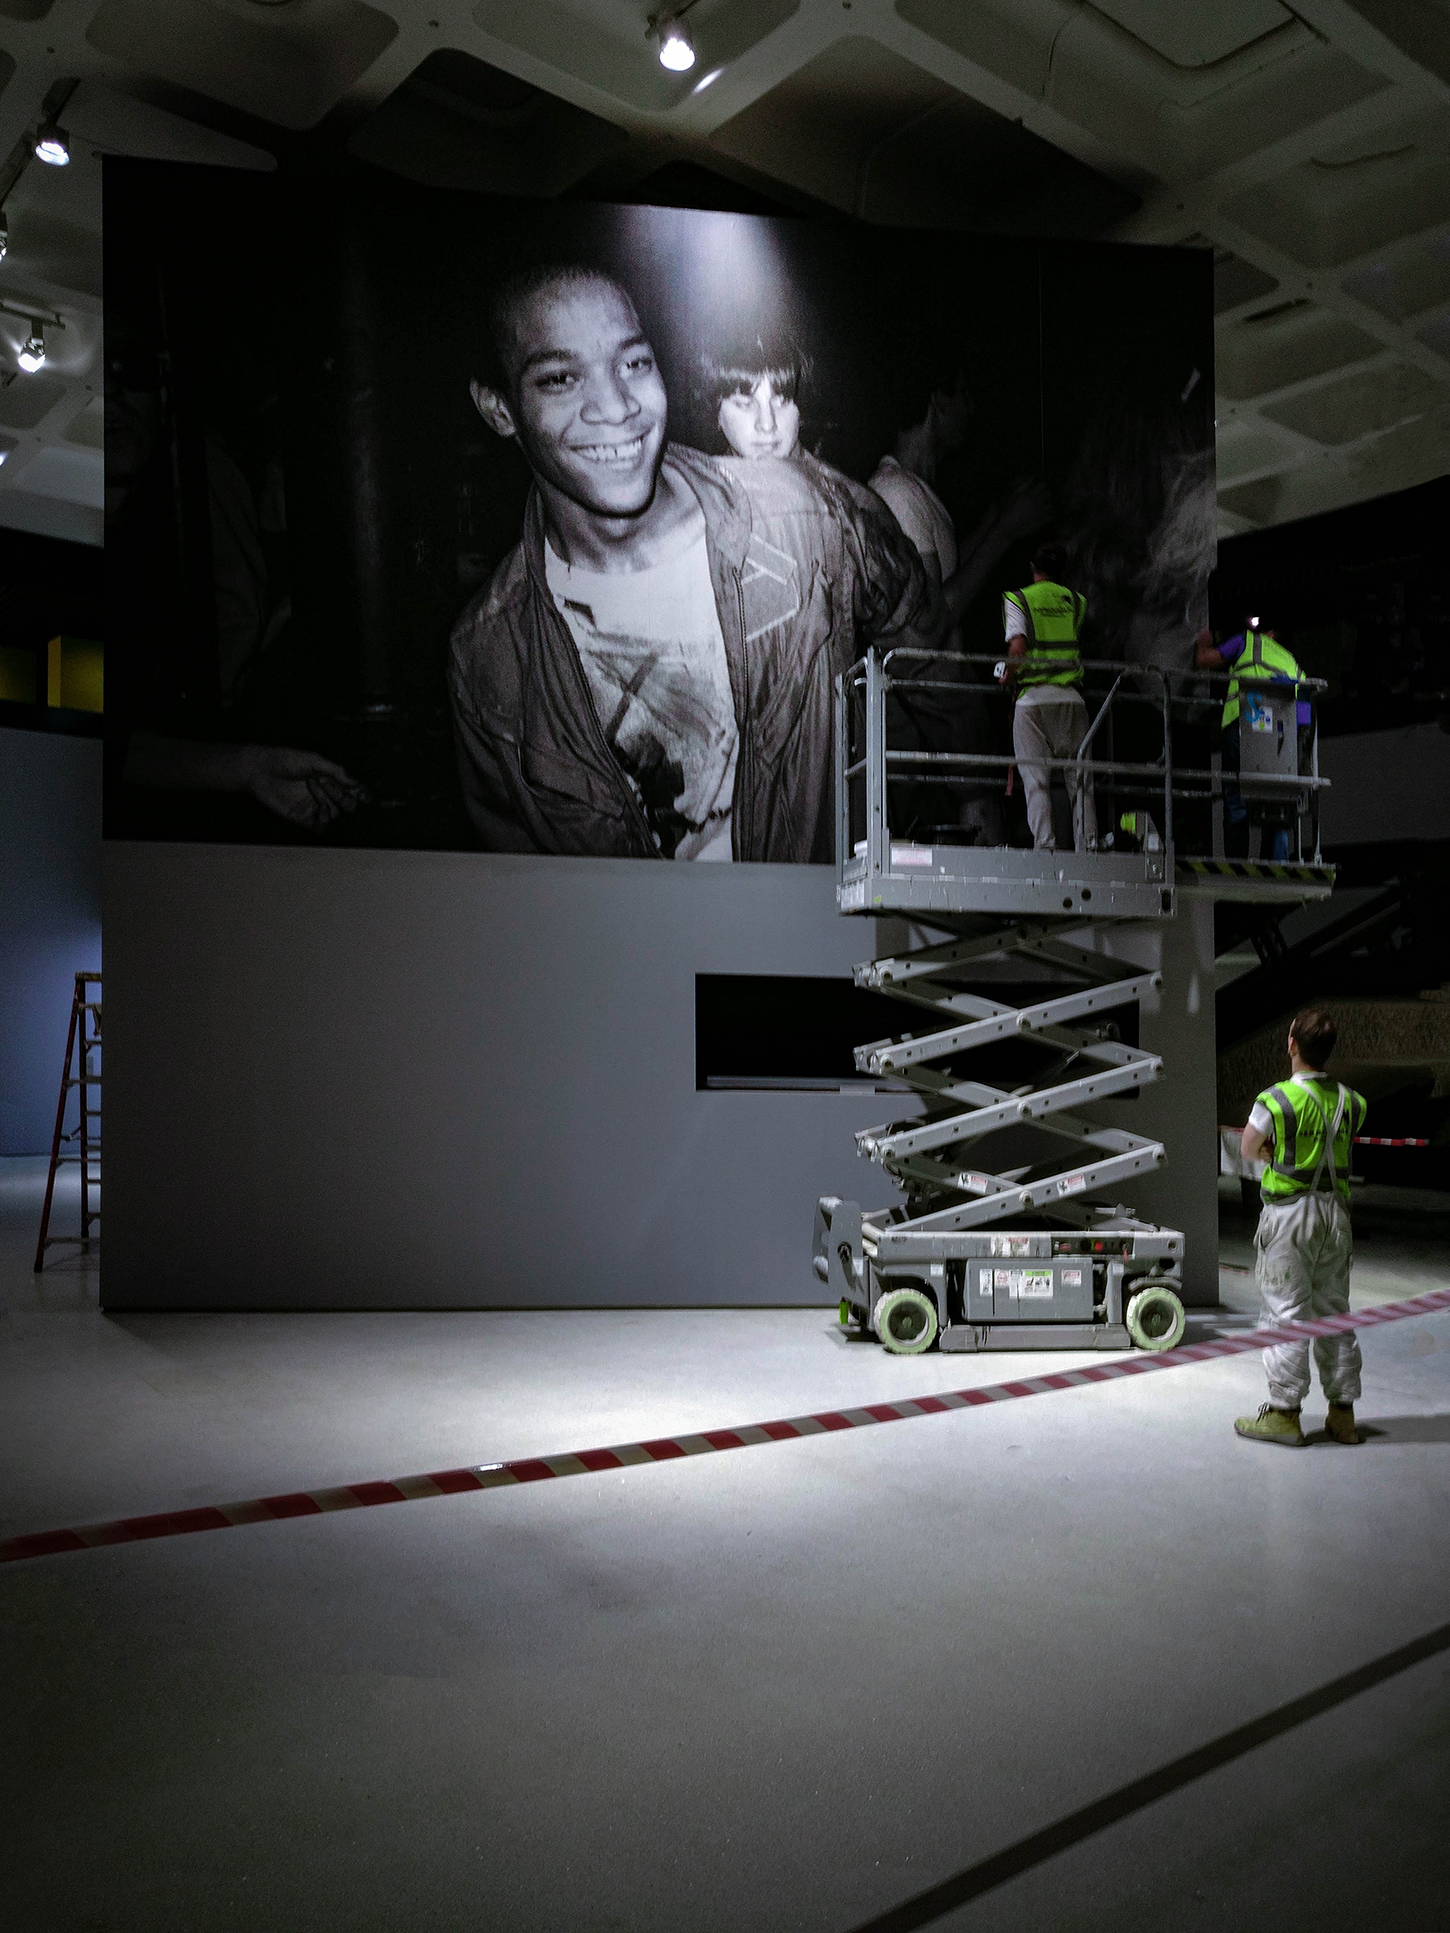 three men on a scissor ladder installing a large printed graphic for an event